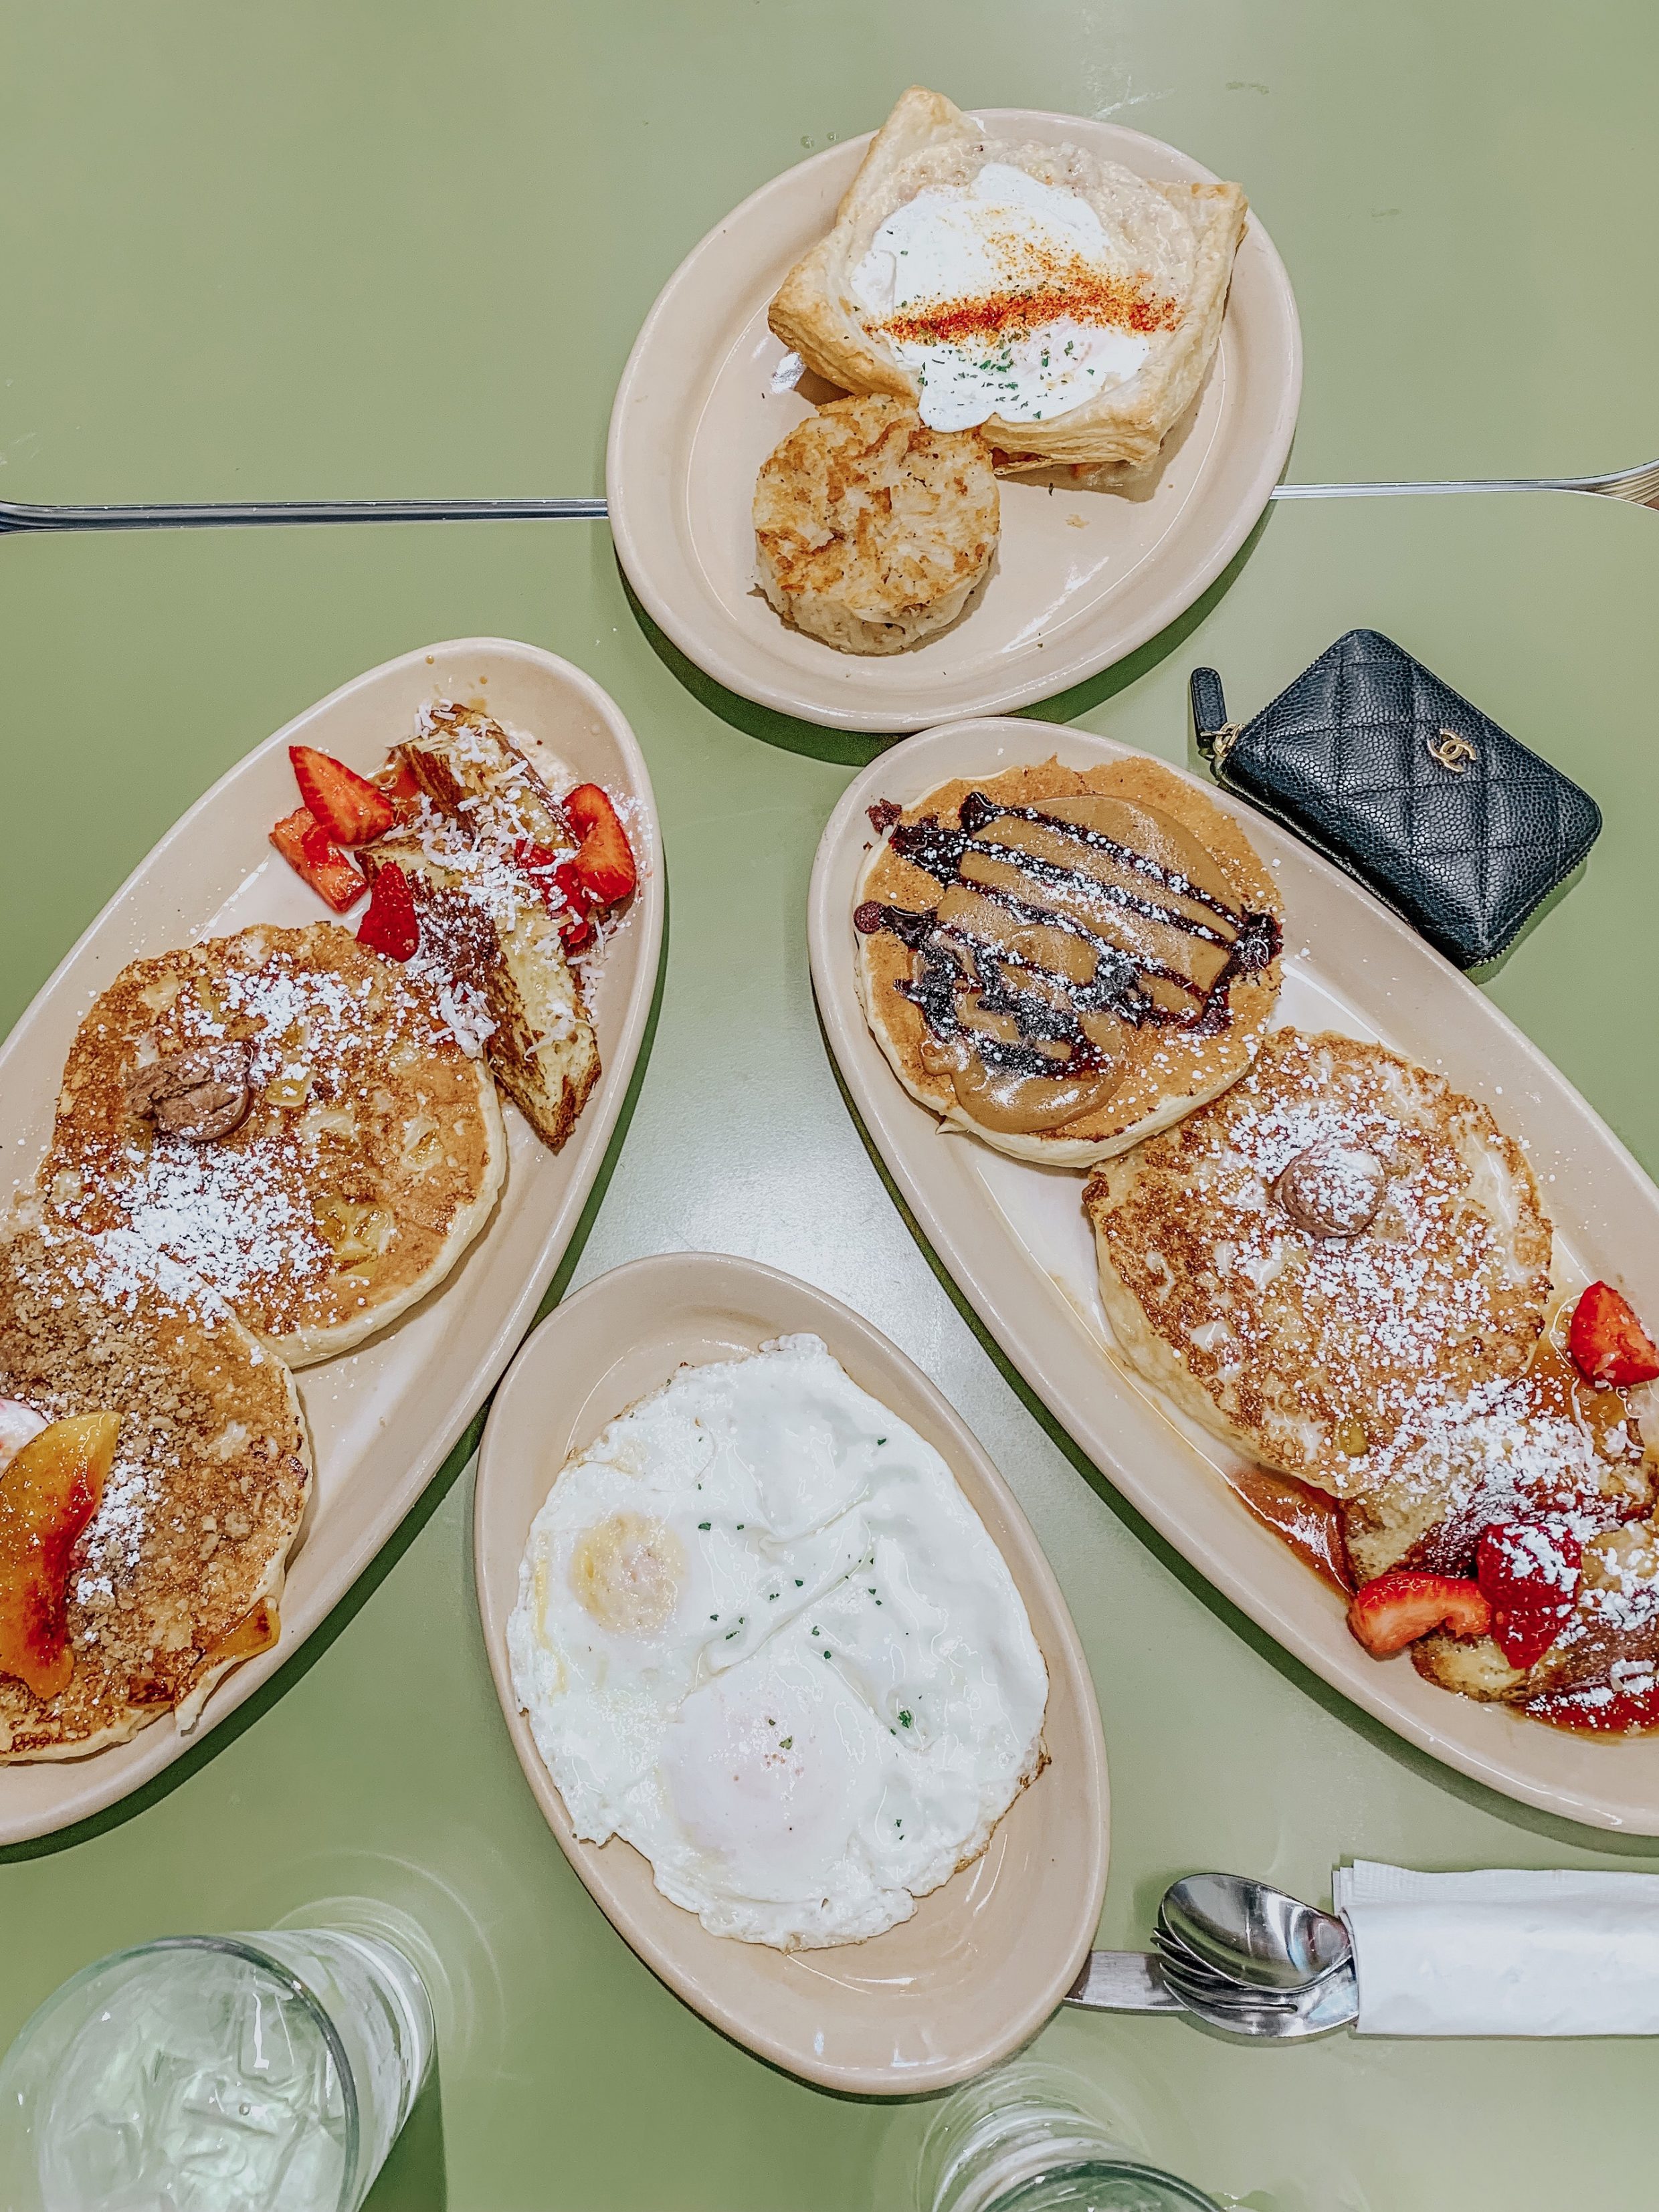 Colorado Travel Guide - eat at Snooze Eatery and order the pancake flight!